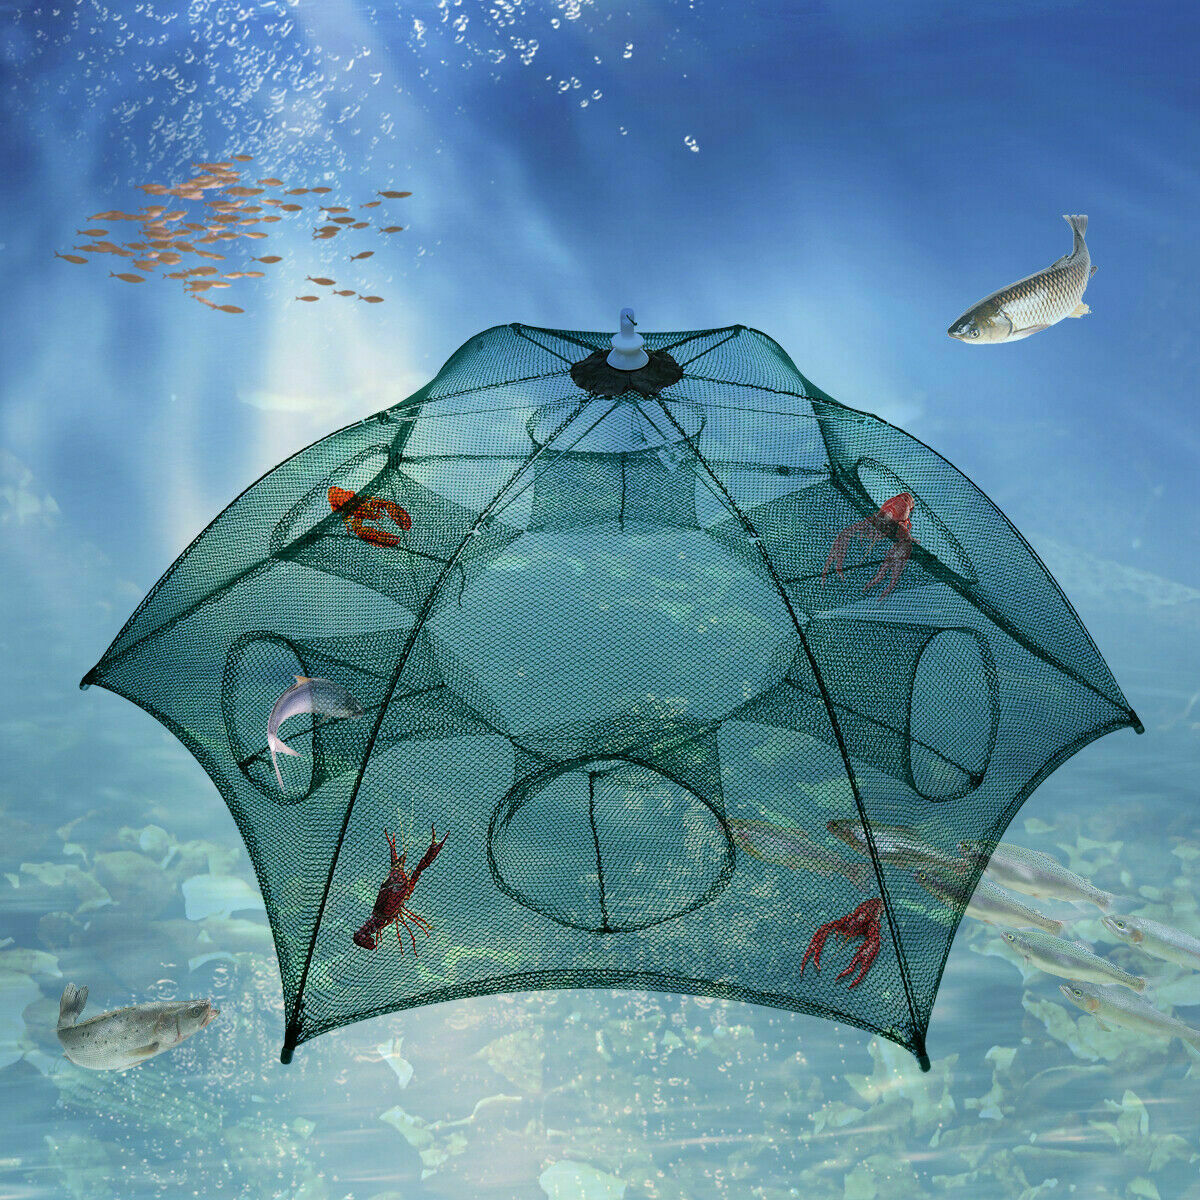 The Ultimate Trappernet - Magic Fishing Net